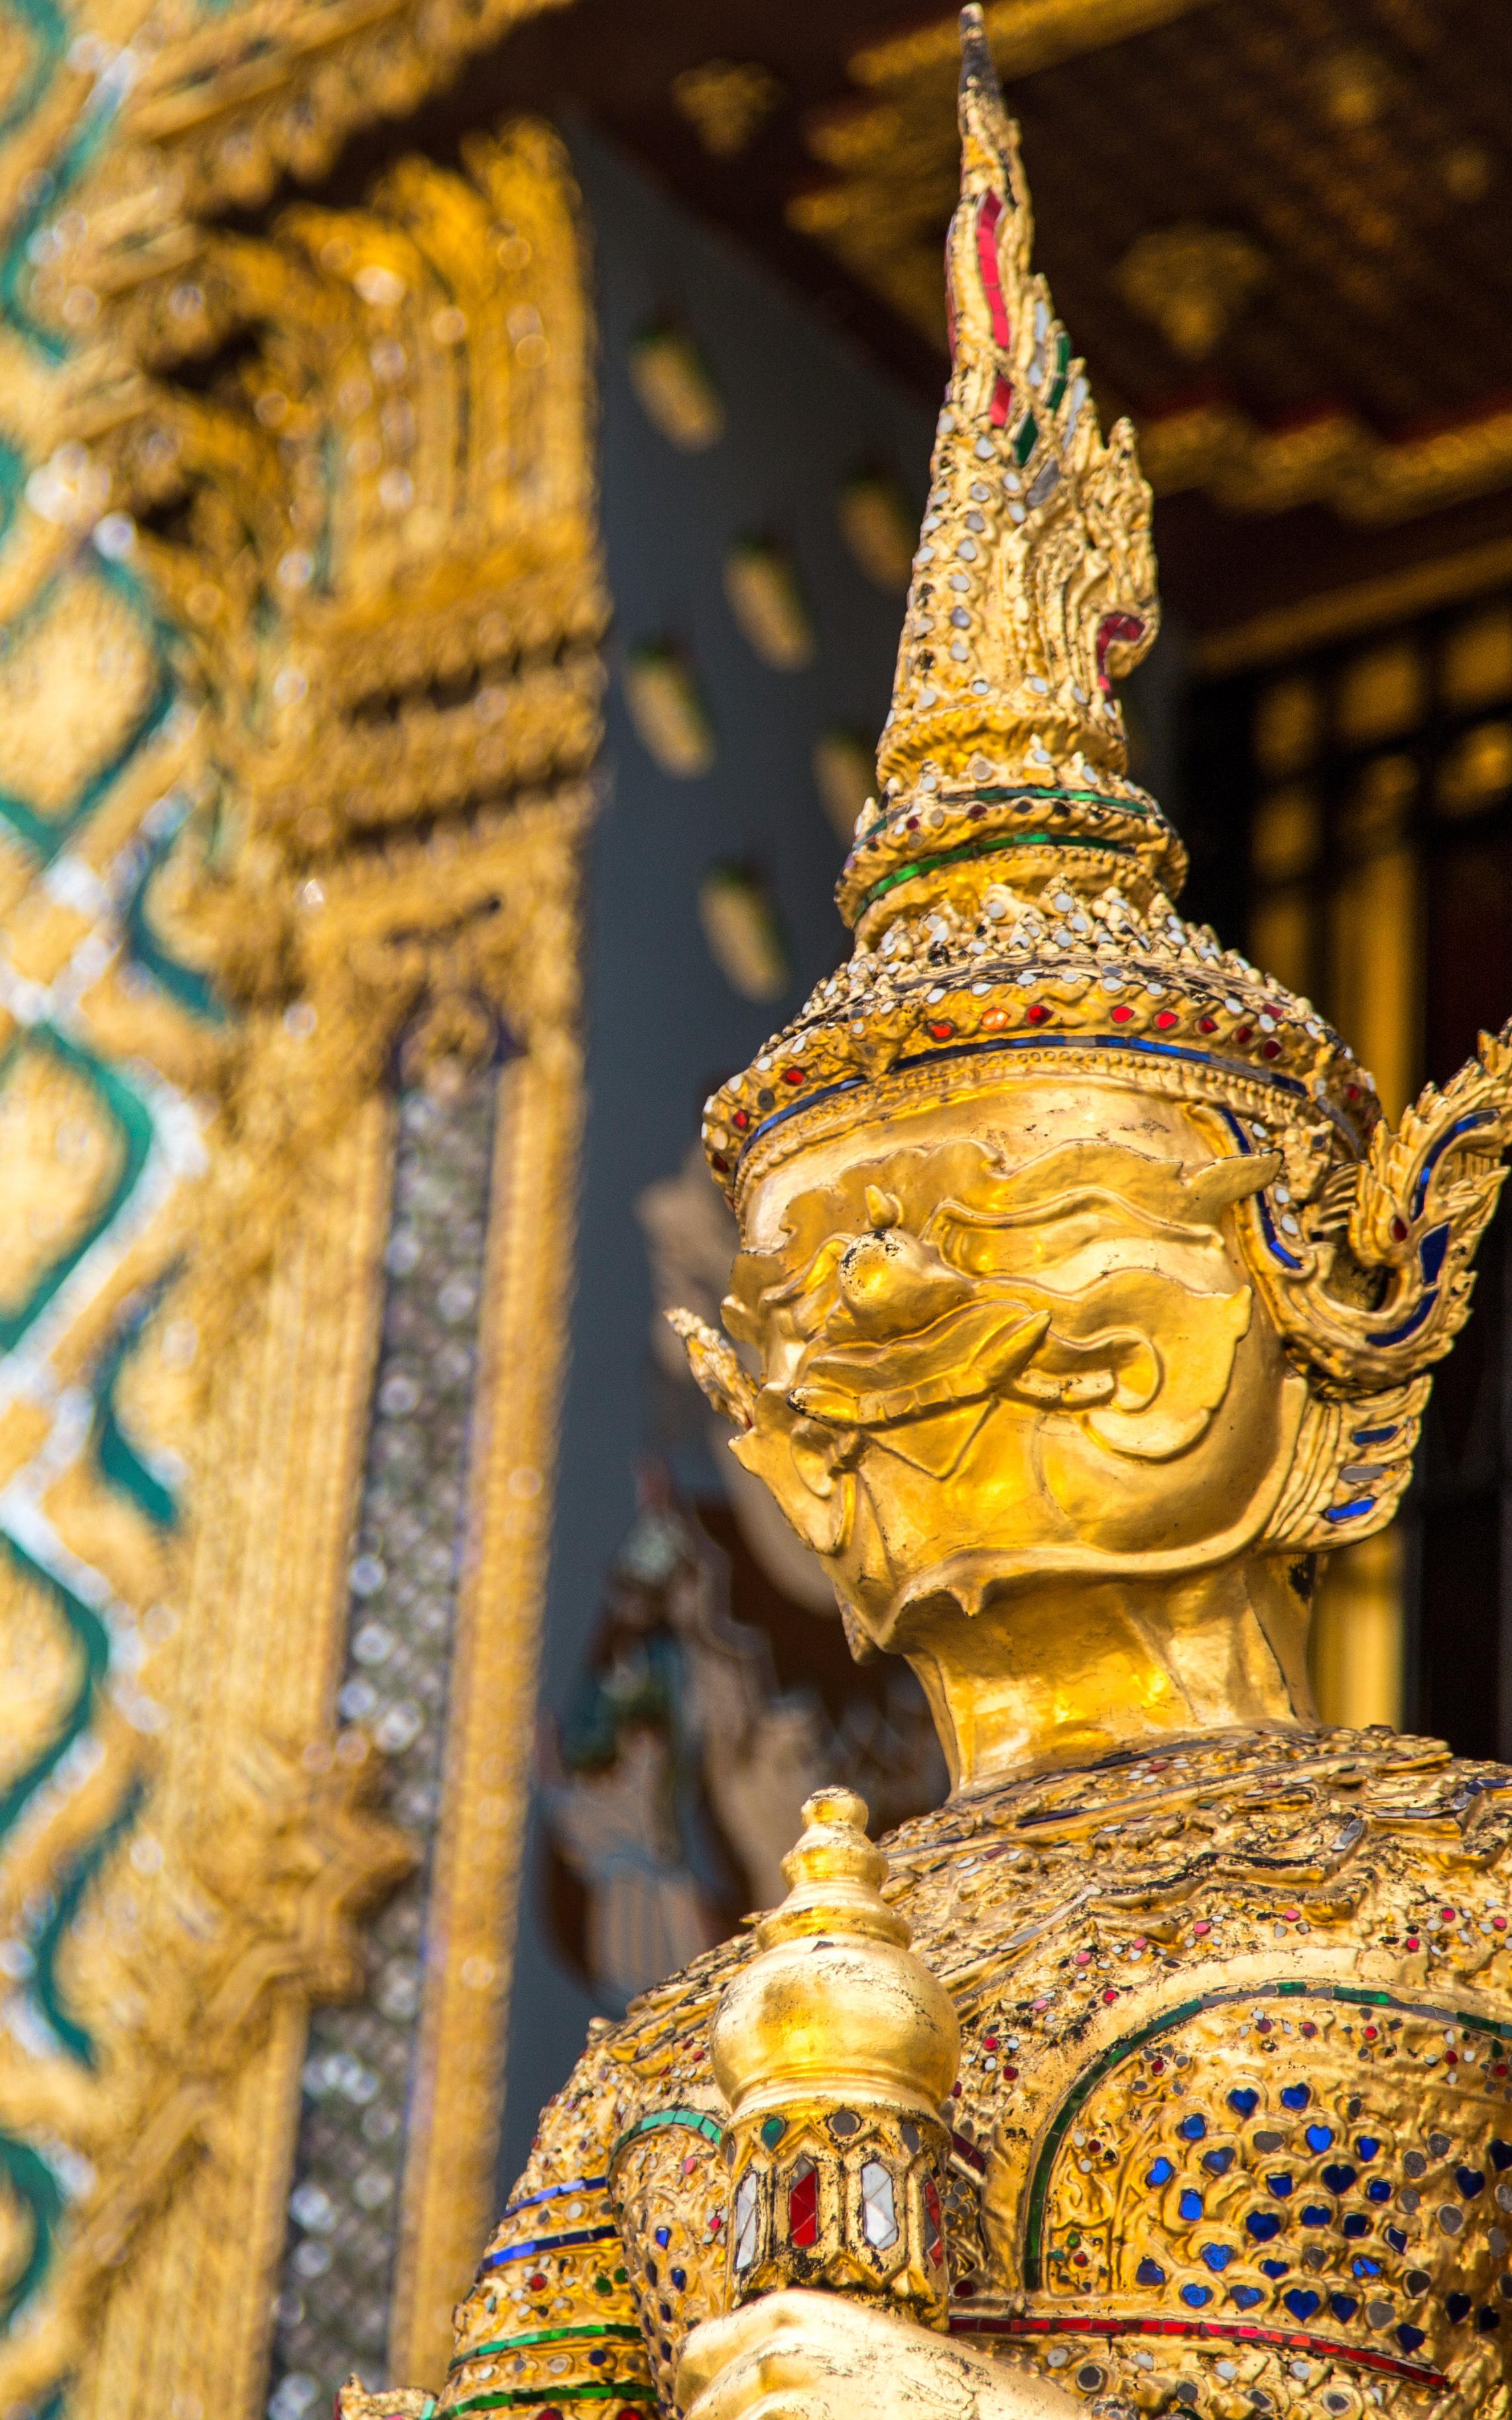 Beautiful News - Golden statue of religious significance in Thailand